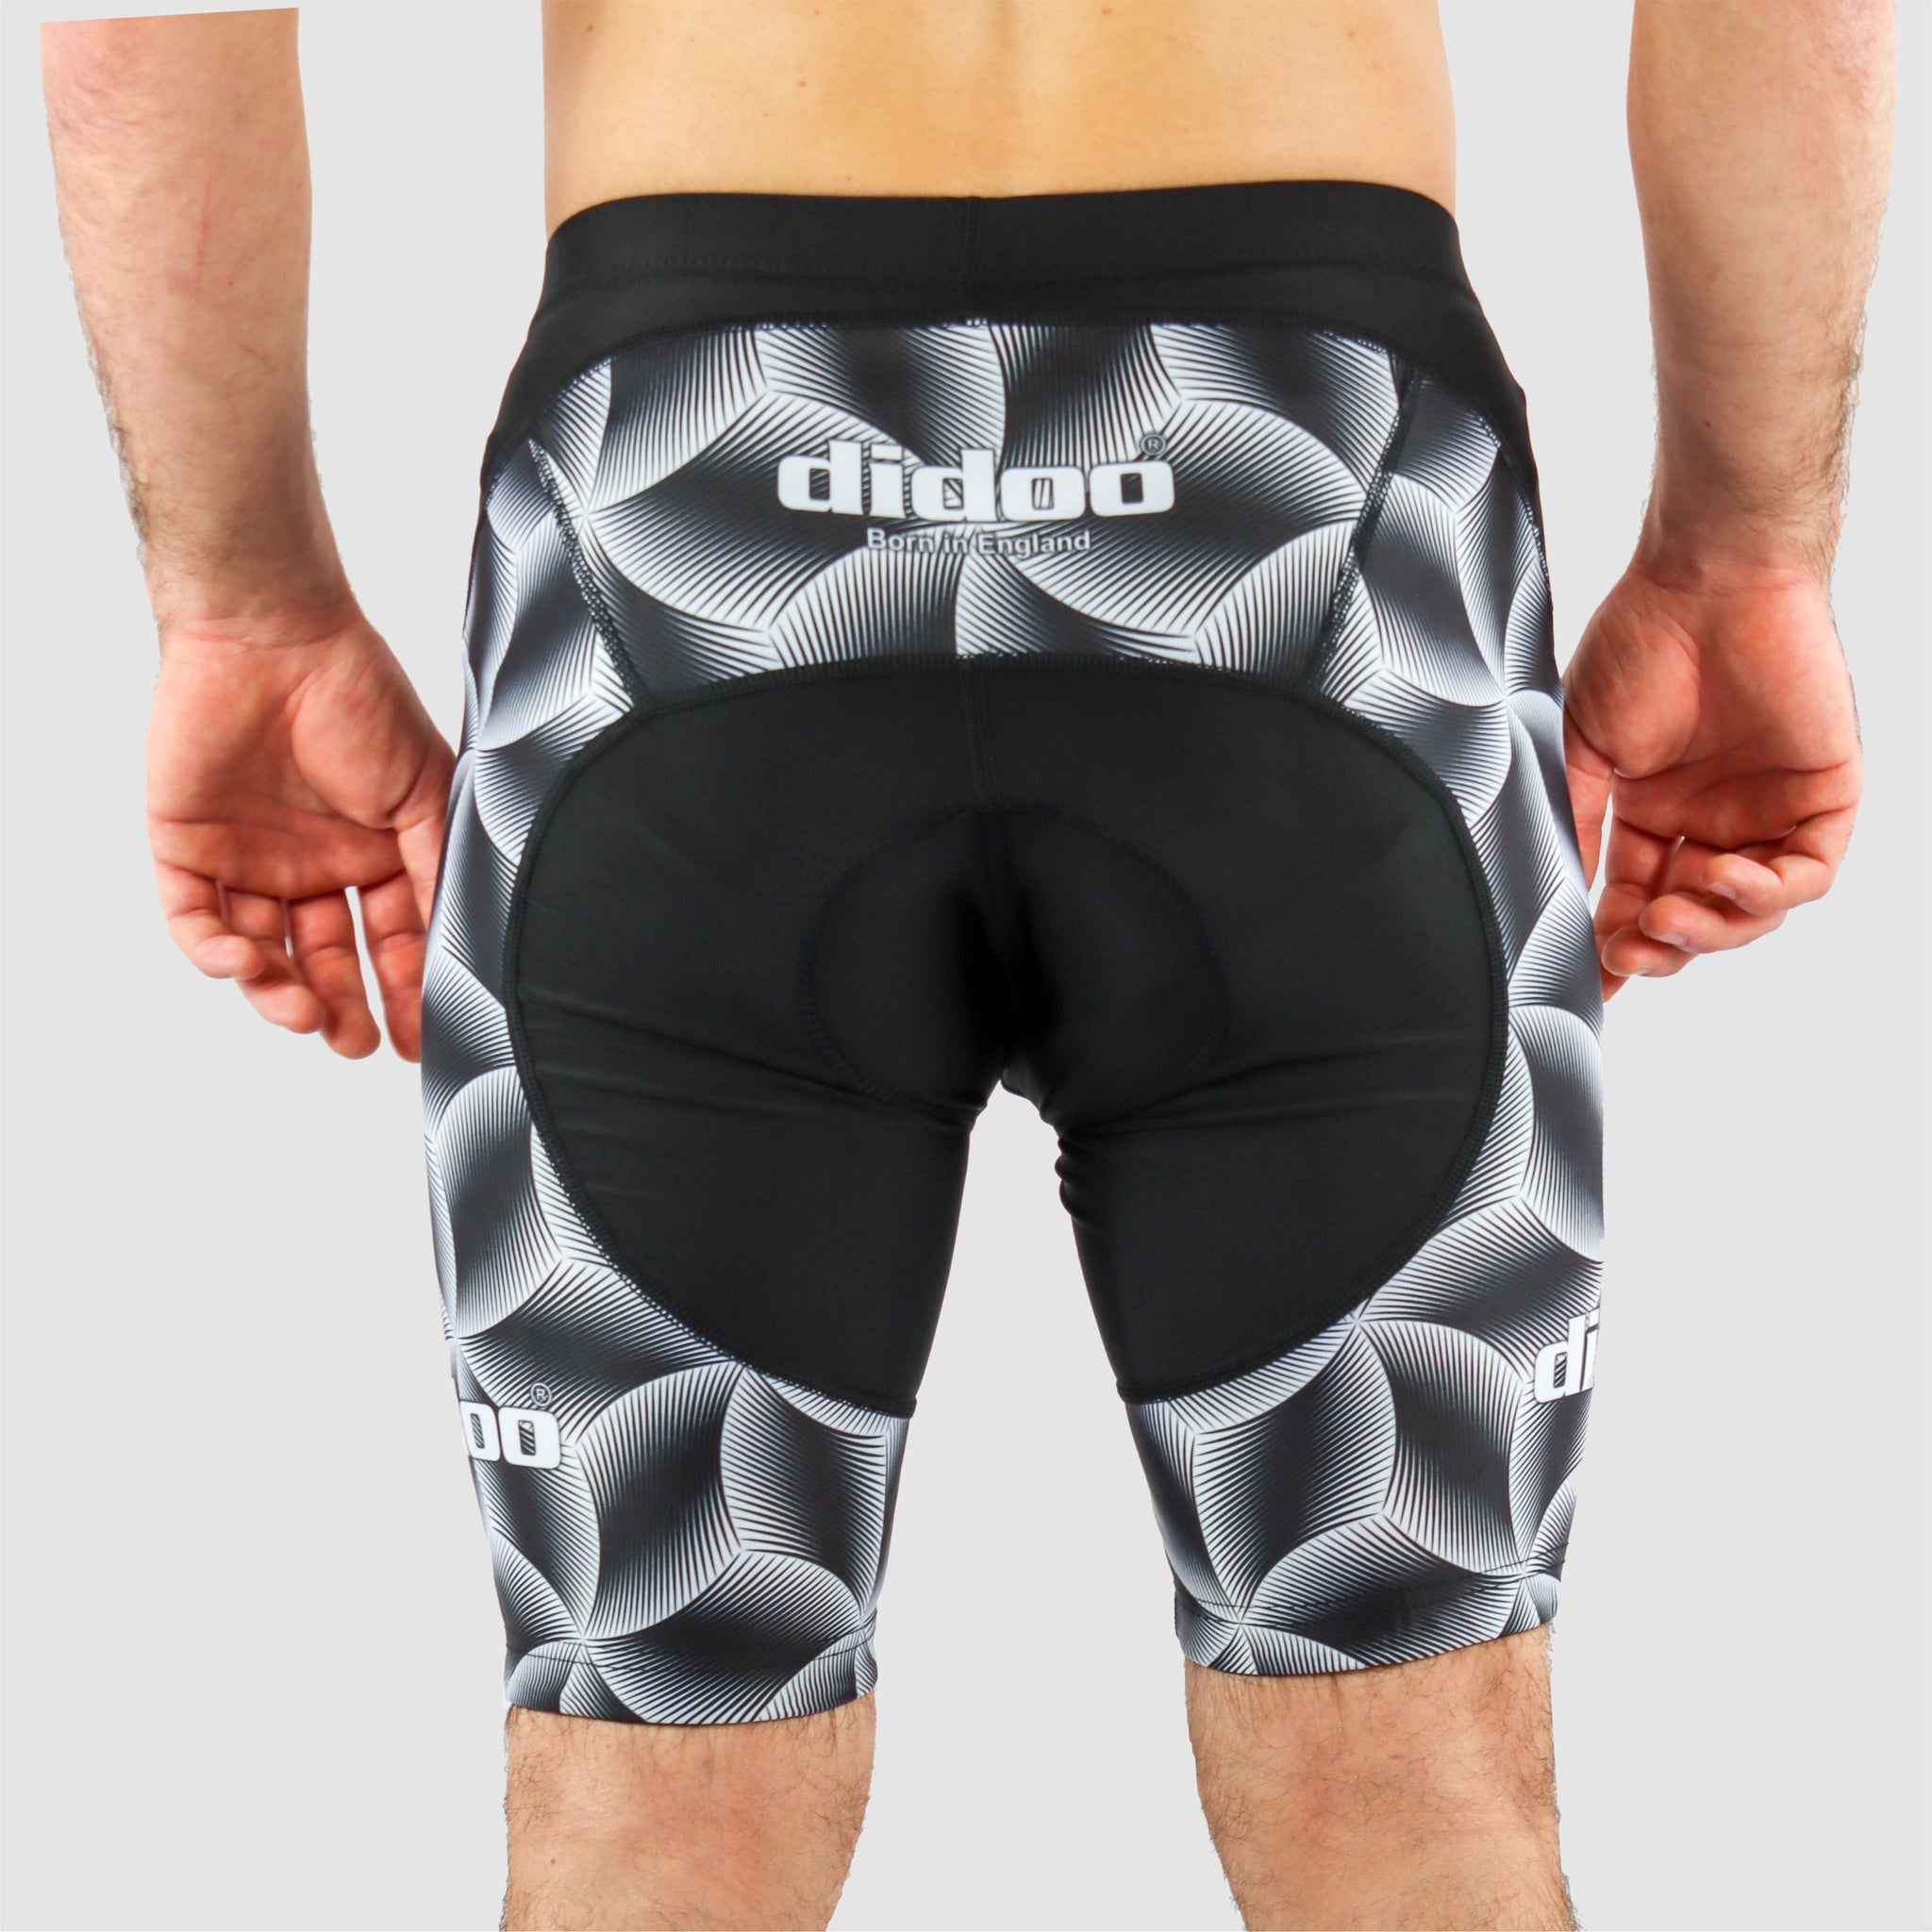 DiDOO Men's Classic Quick Dry Padded Cycling Shorts Black and White